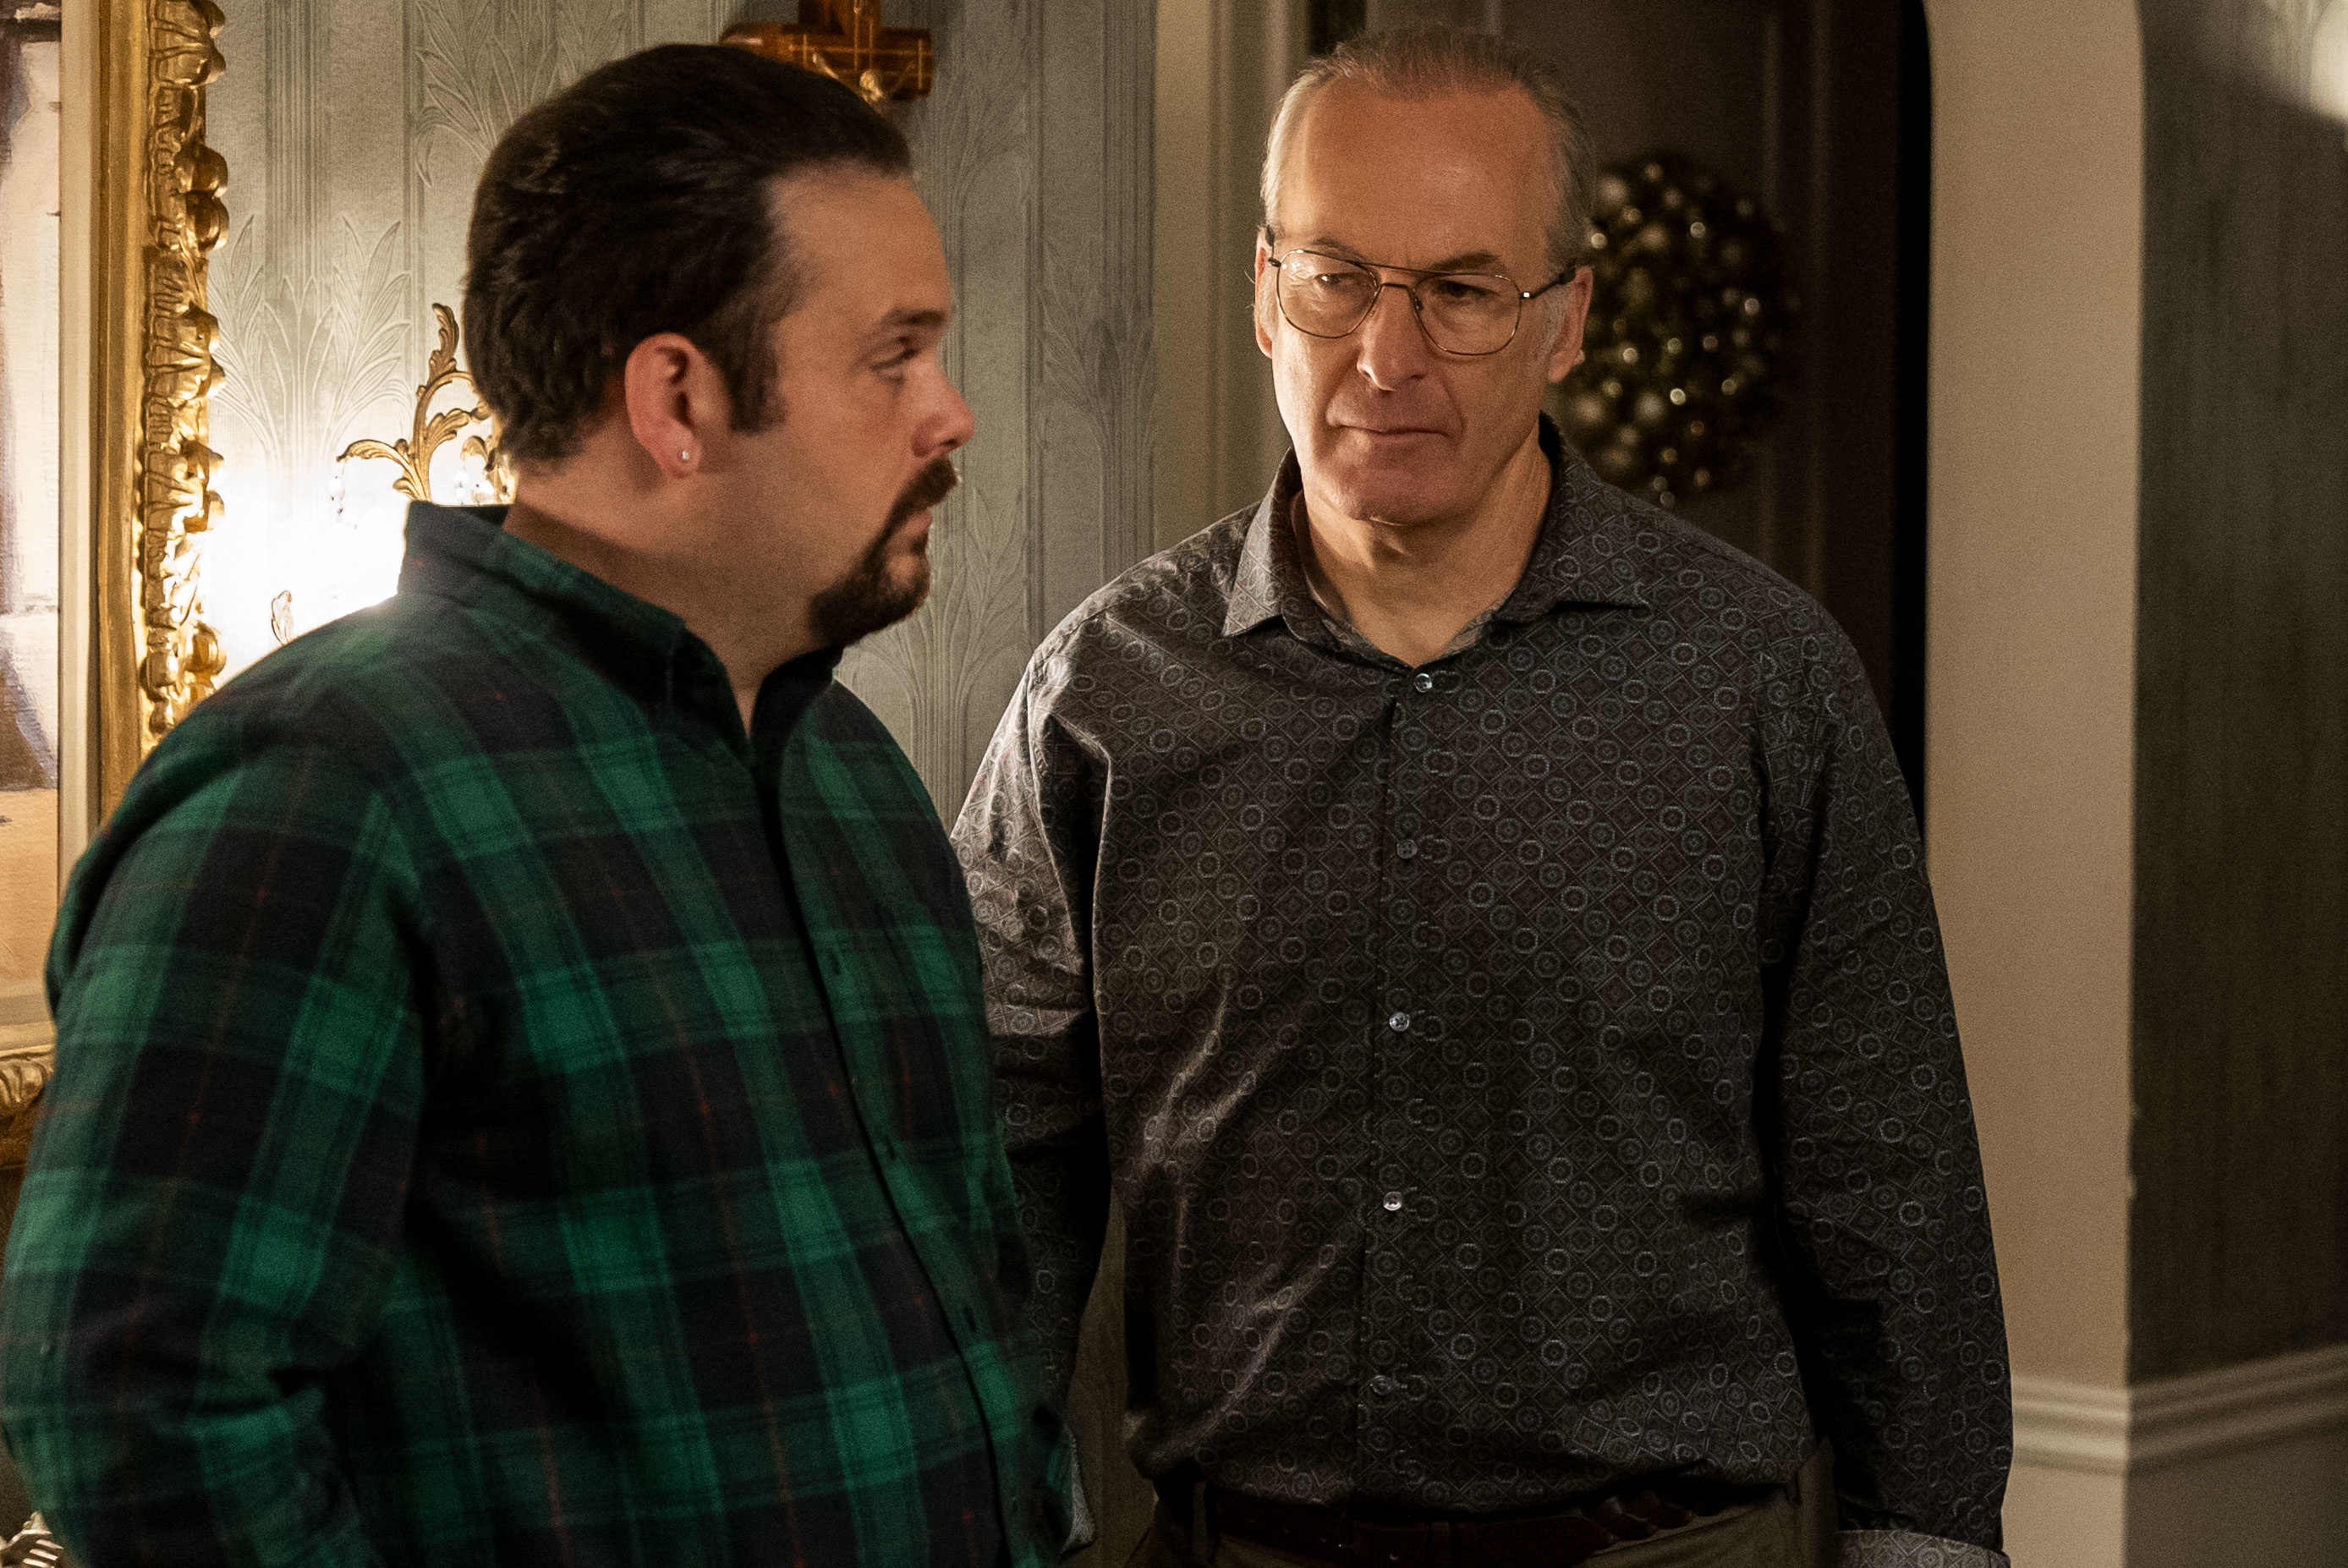 Ricky Staffieri as Ted Fak and Bob Odenkirk as Uncle Lee in The Bear wearing button-up shirts